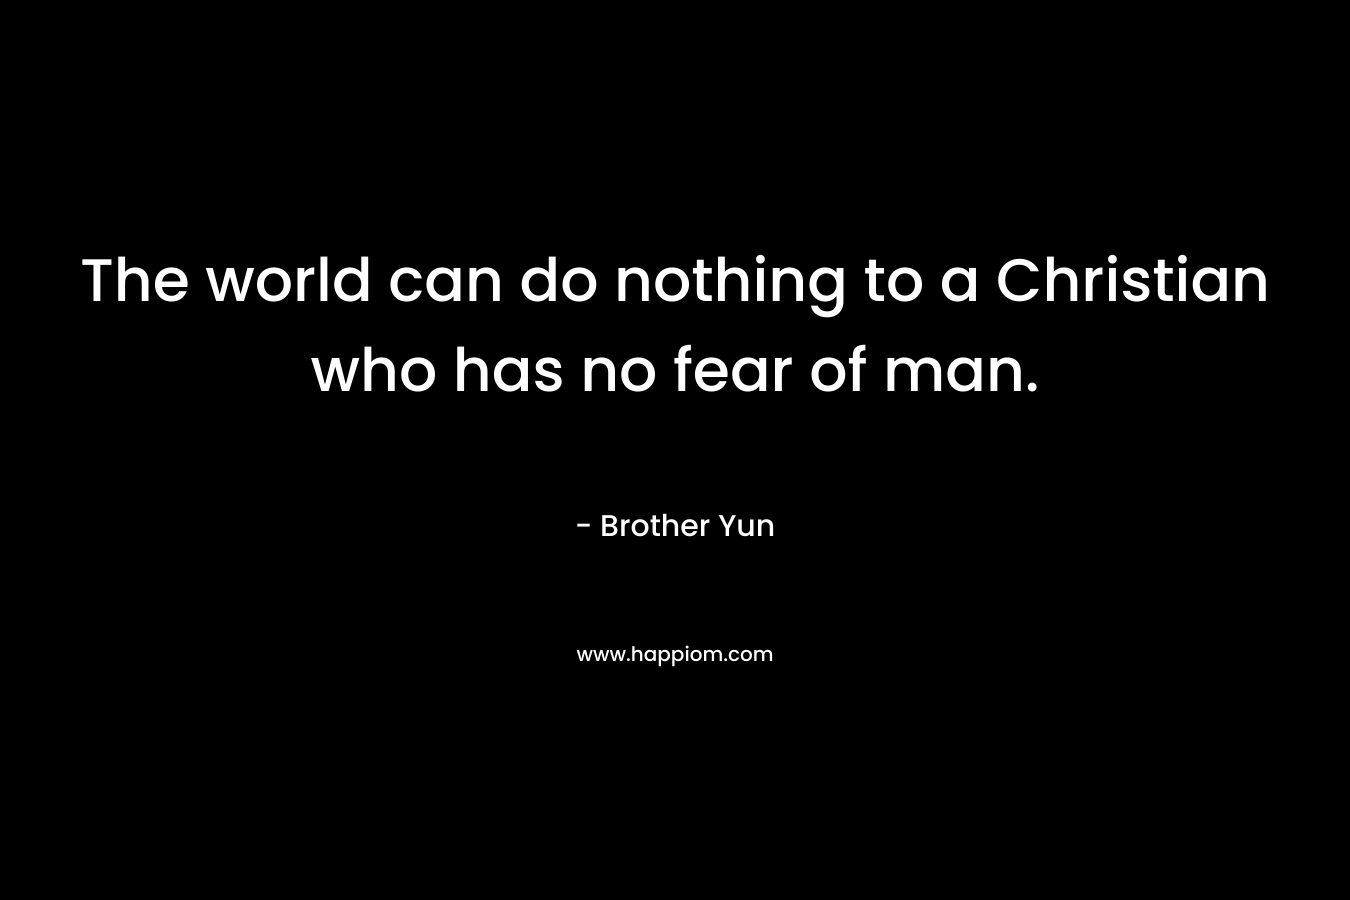 The world can do nothing to a Christian who has no fear of man.